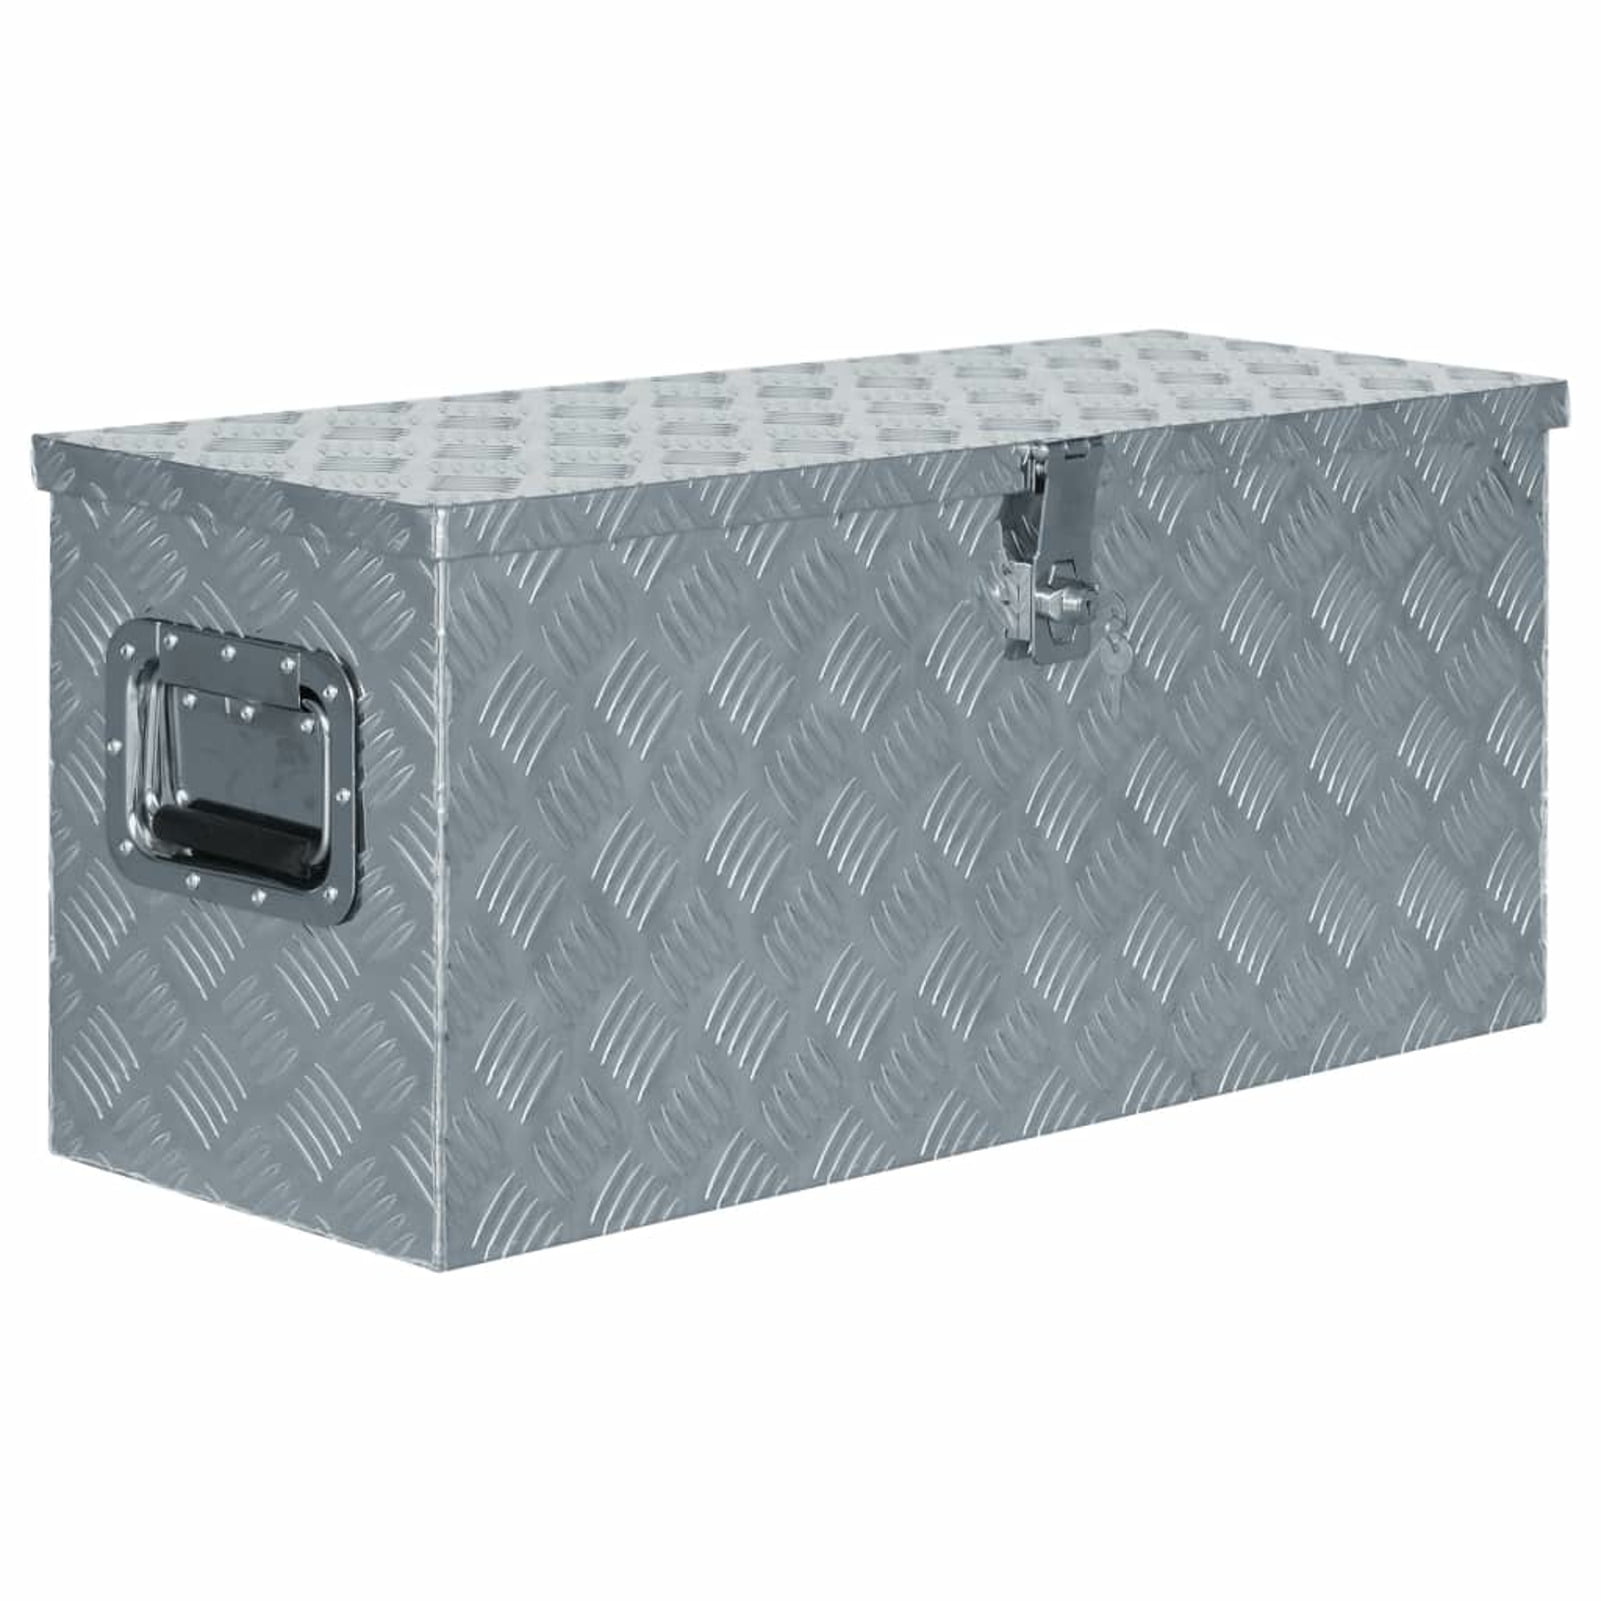 Details about   Portable Aluminum Tool Box Safety Equipment Toolbox Instrument box Storage Case 